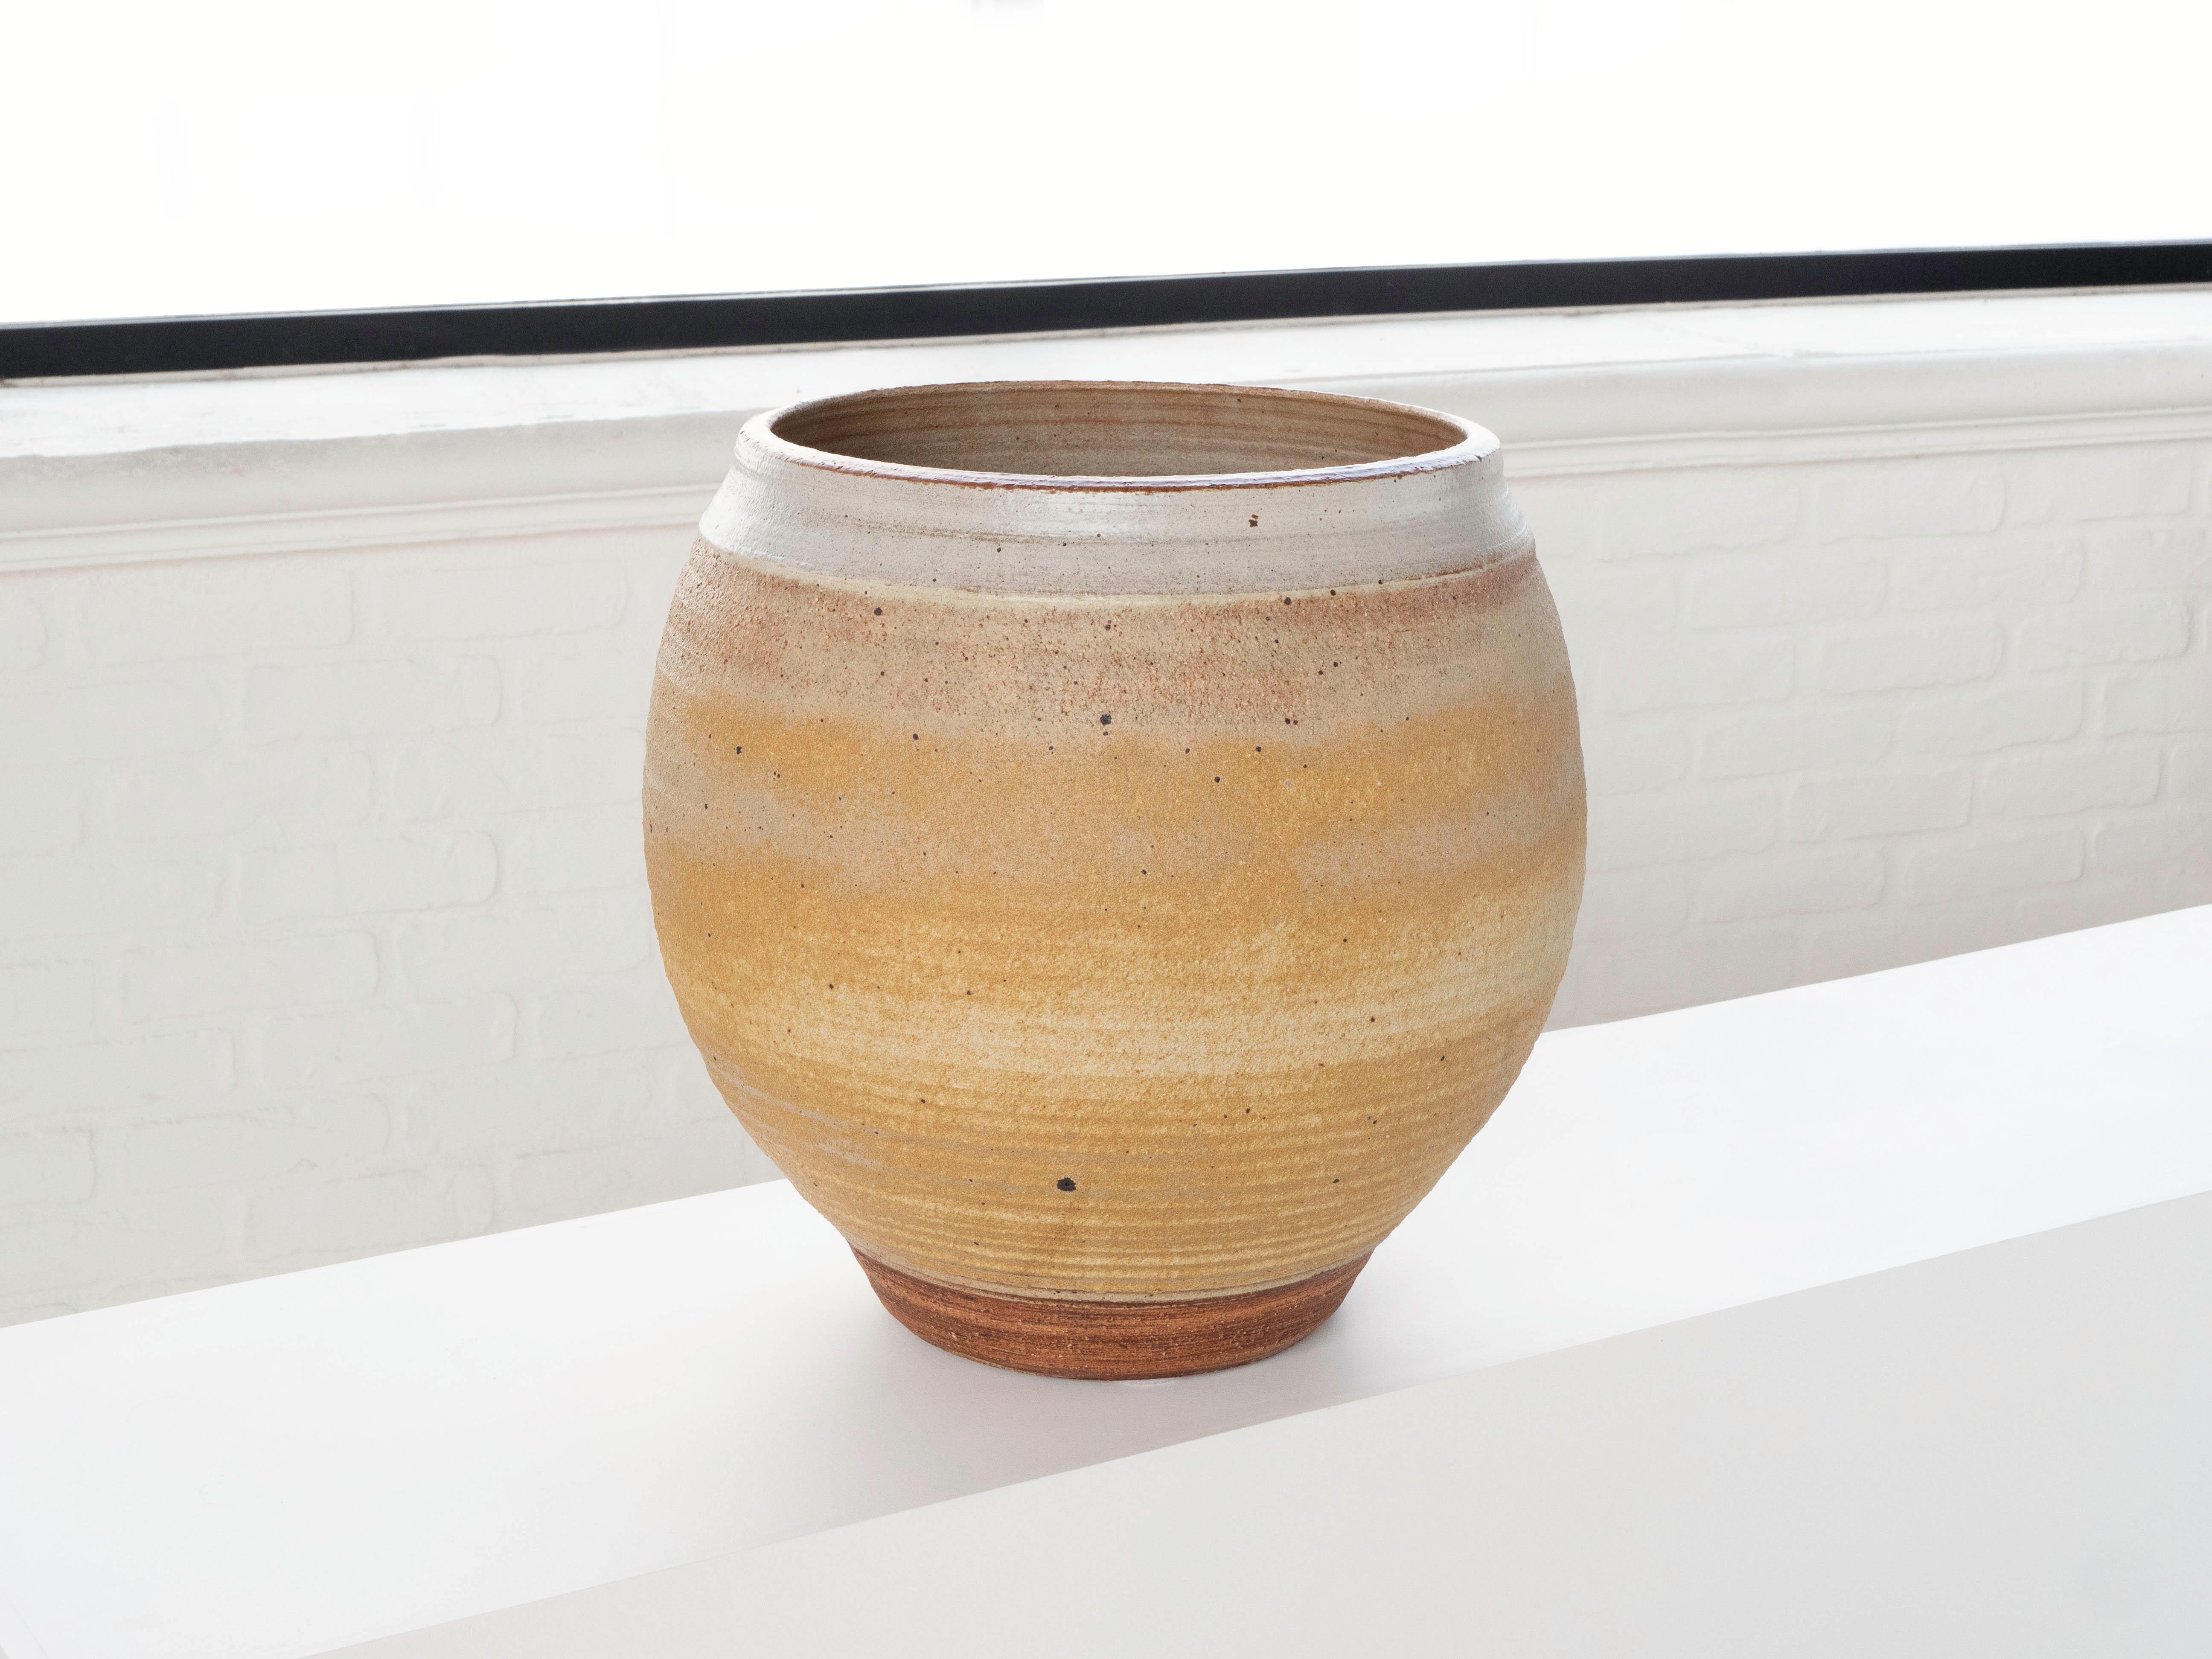 A large hand thrown planter by ceramist Bob Kinzie for his company Affiliated Craftsmen, California 1960's. The upper portion of the piece has a yellow tan tone glaze with espresso colored specks while the bottom portion shows exposed stoneware. The